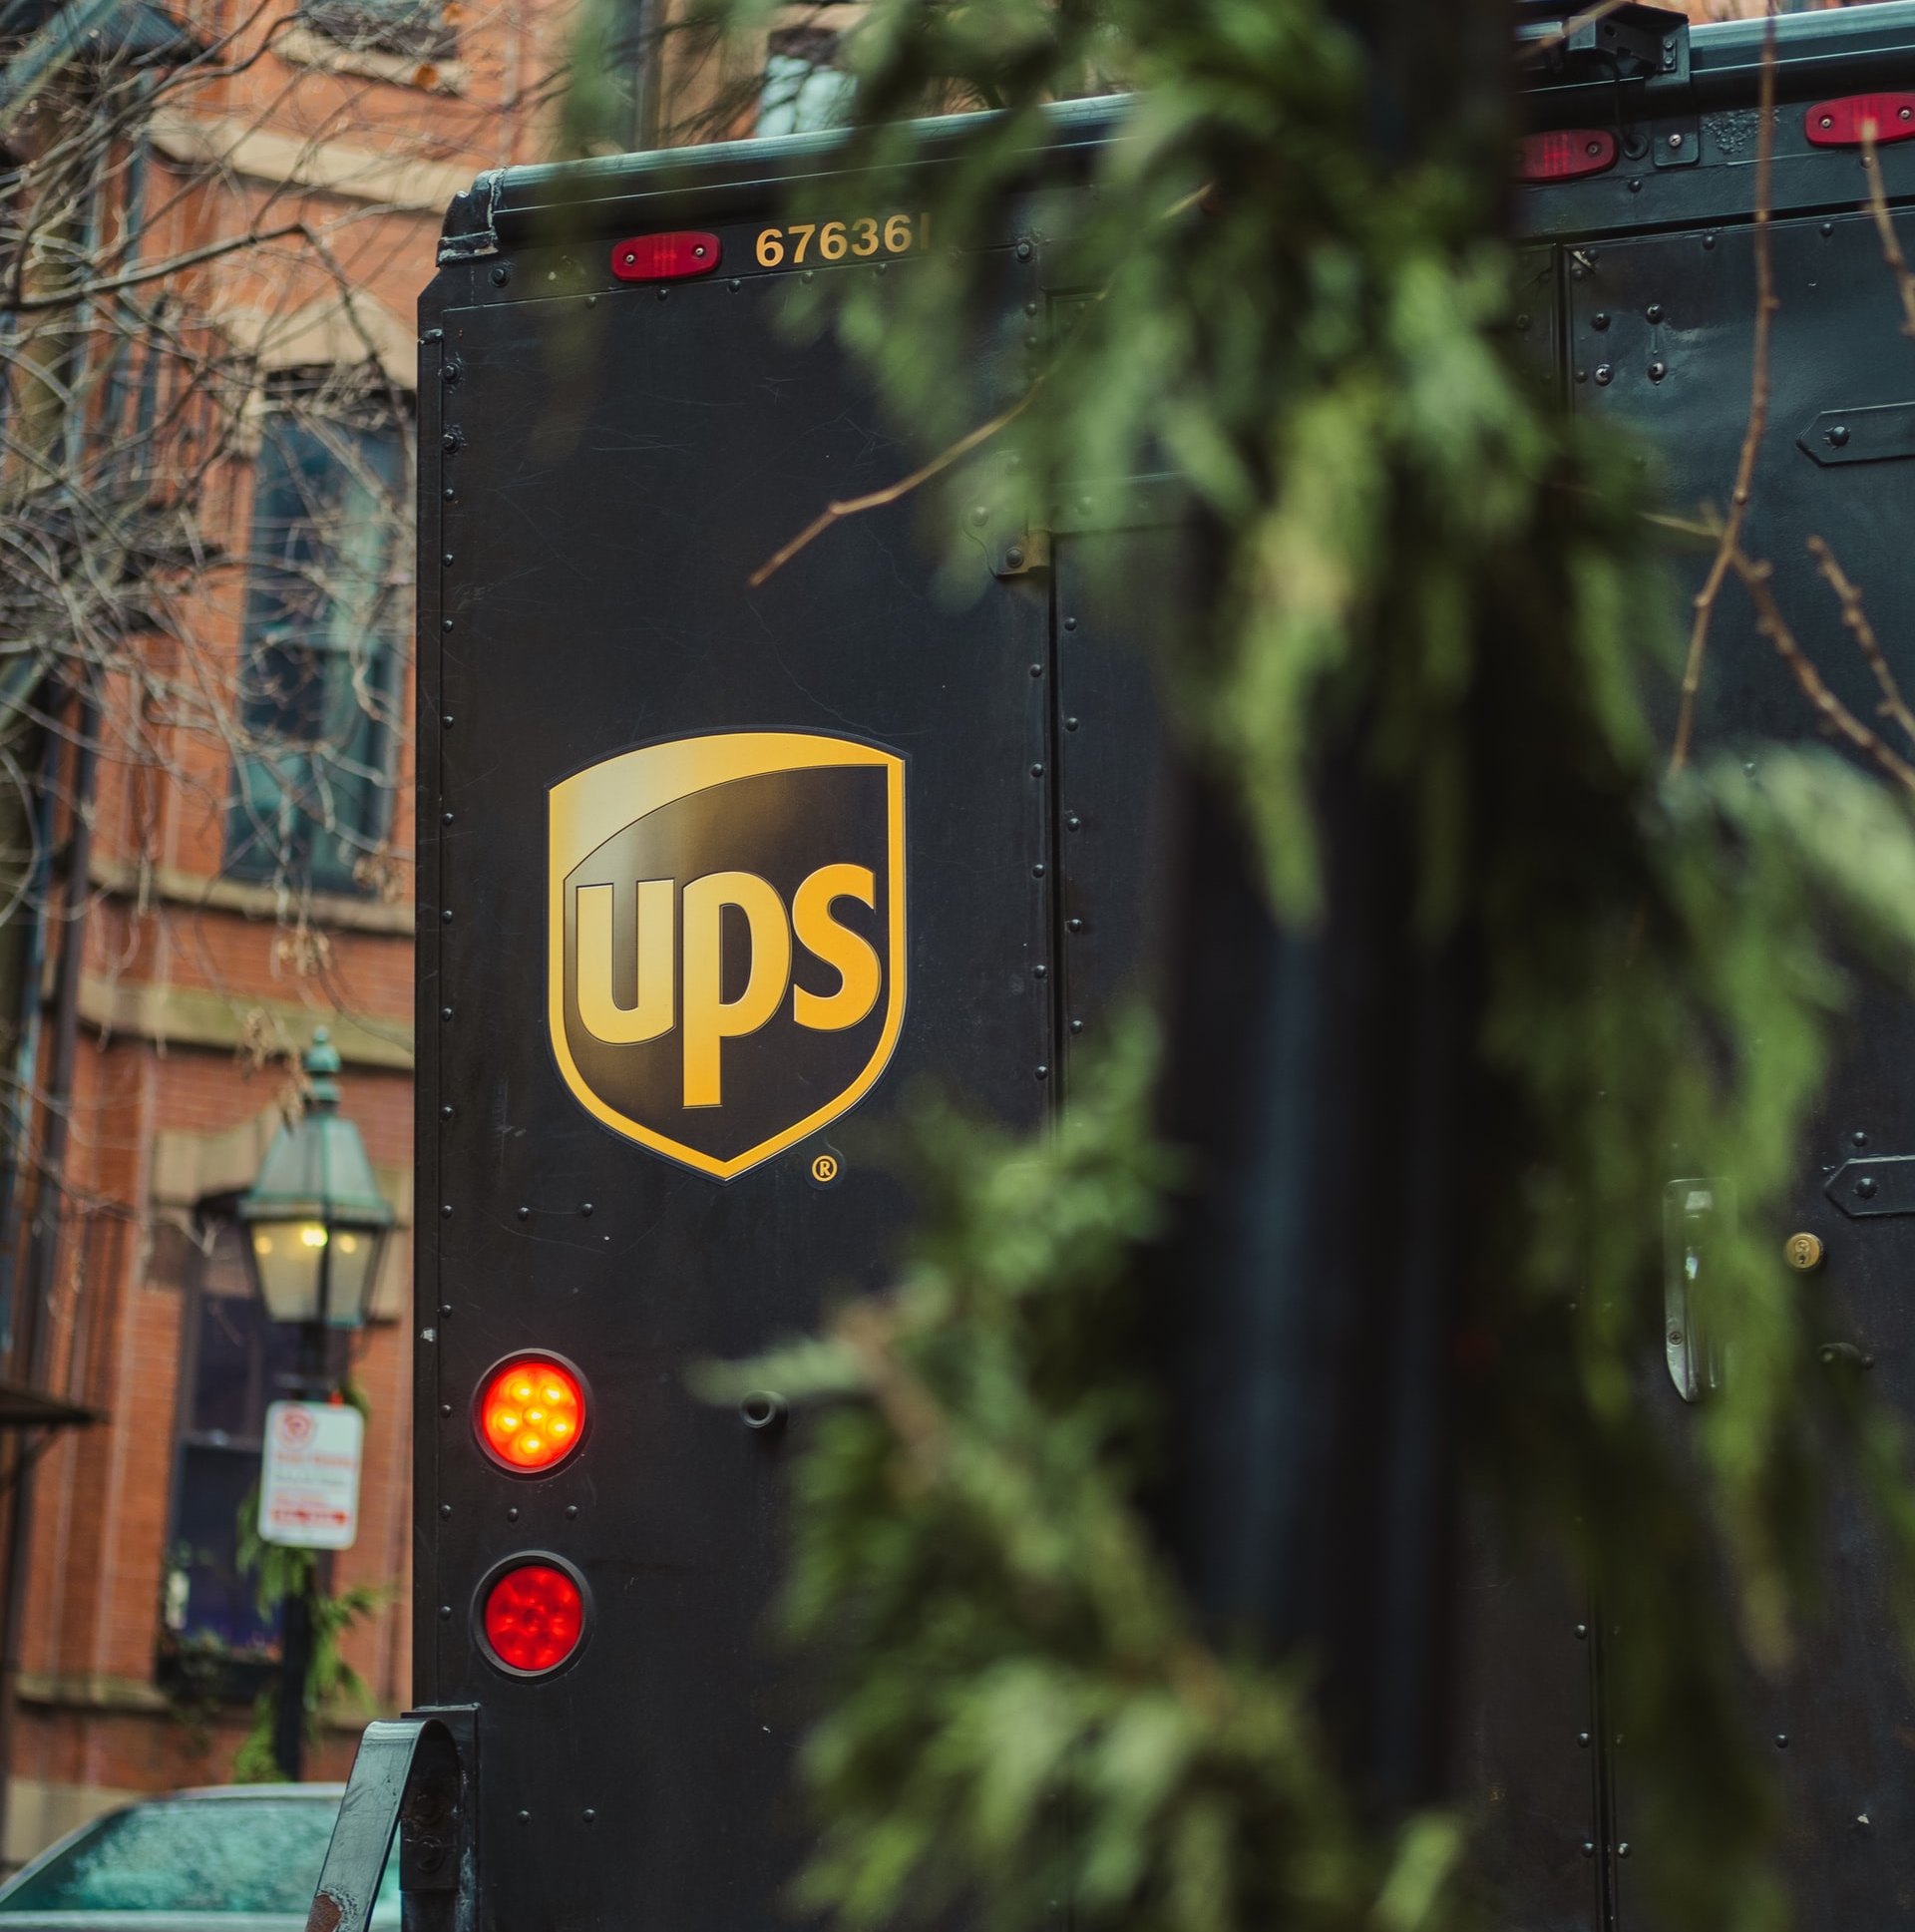 UPS Art Shipping: How Safe Is It?